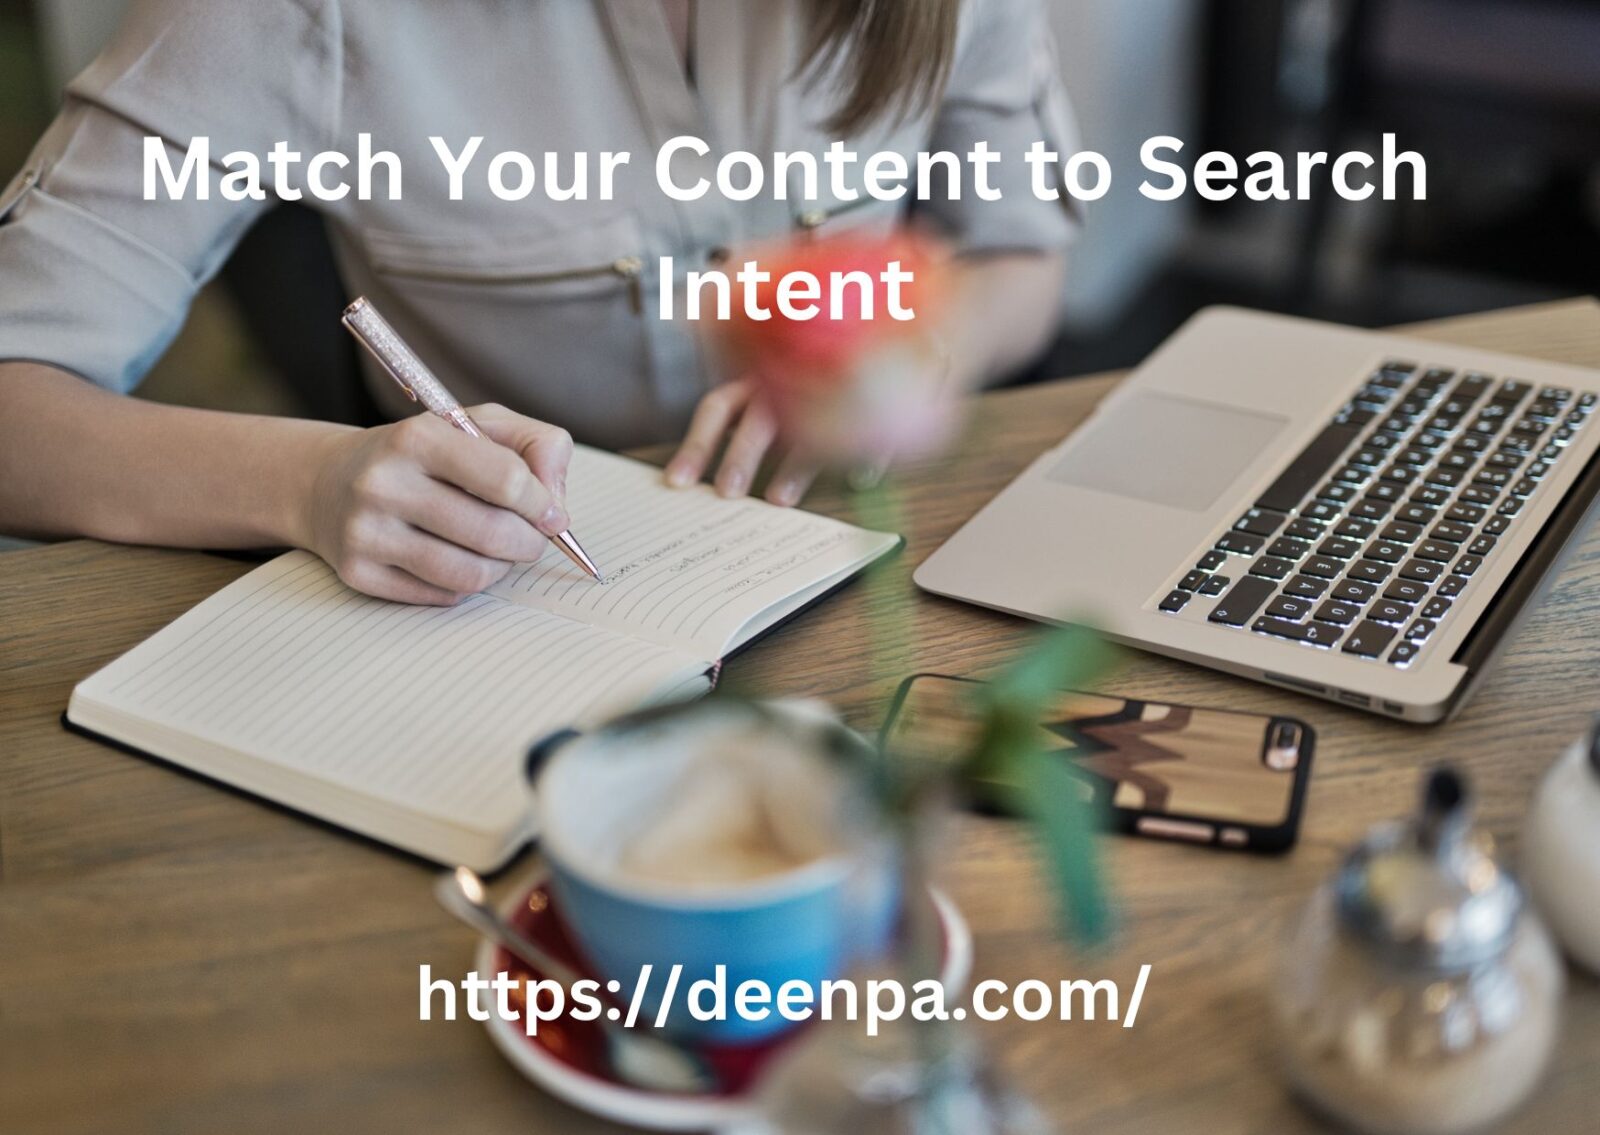 Match Your Content to Search Intent